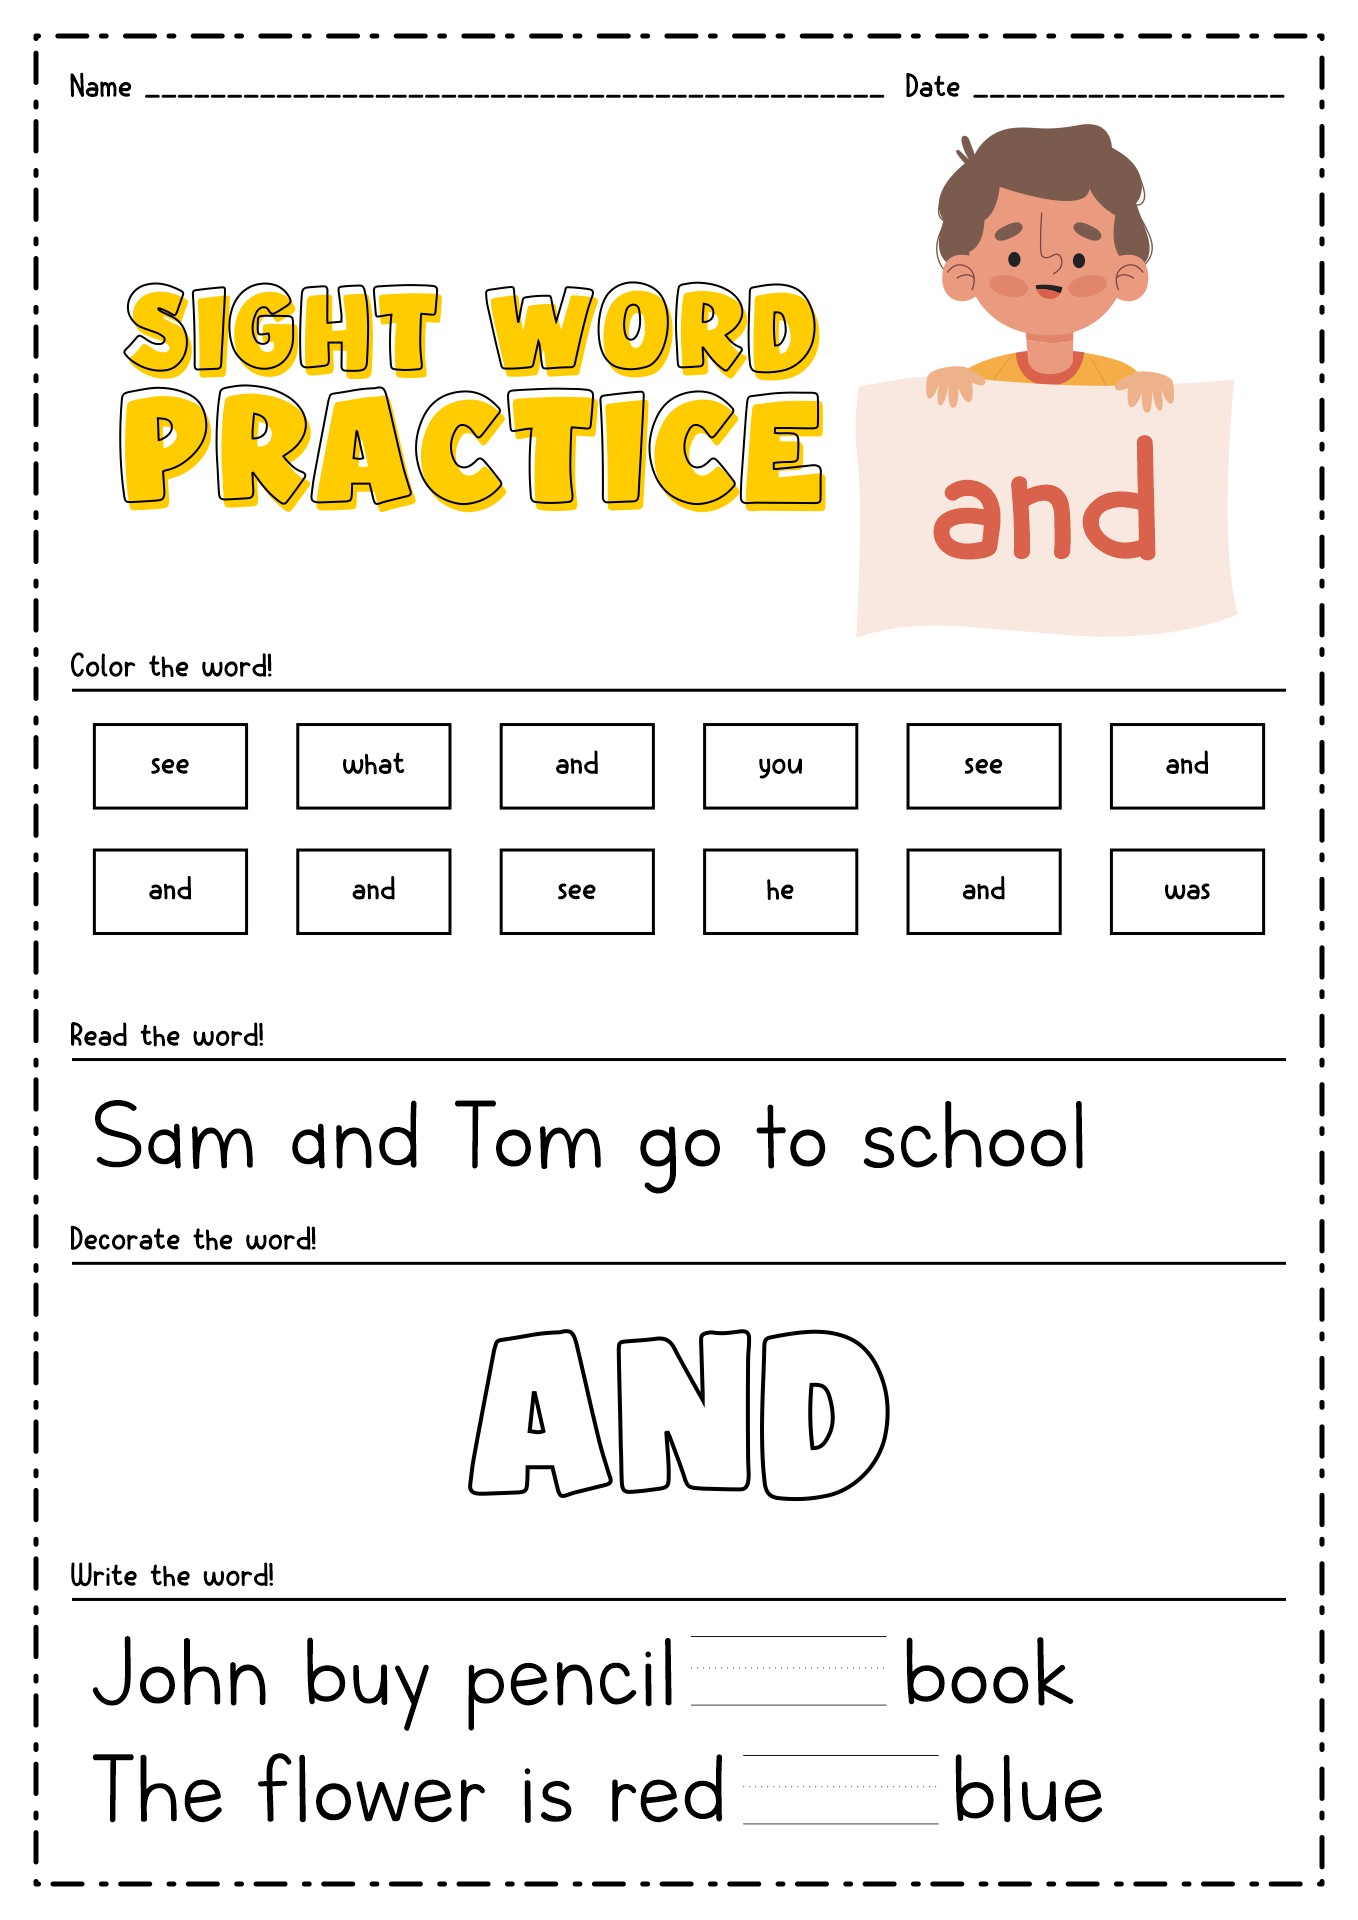 19 Best Images Of Fry s First 100 Words Worksheets 100 Fry Sight Word Worksheet Fry First 100